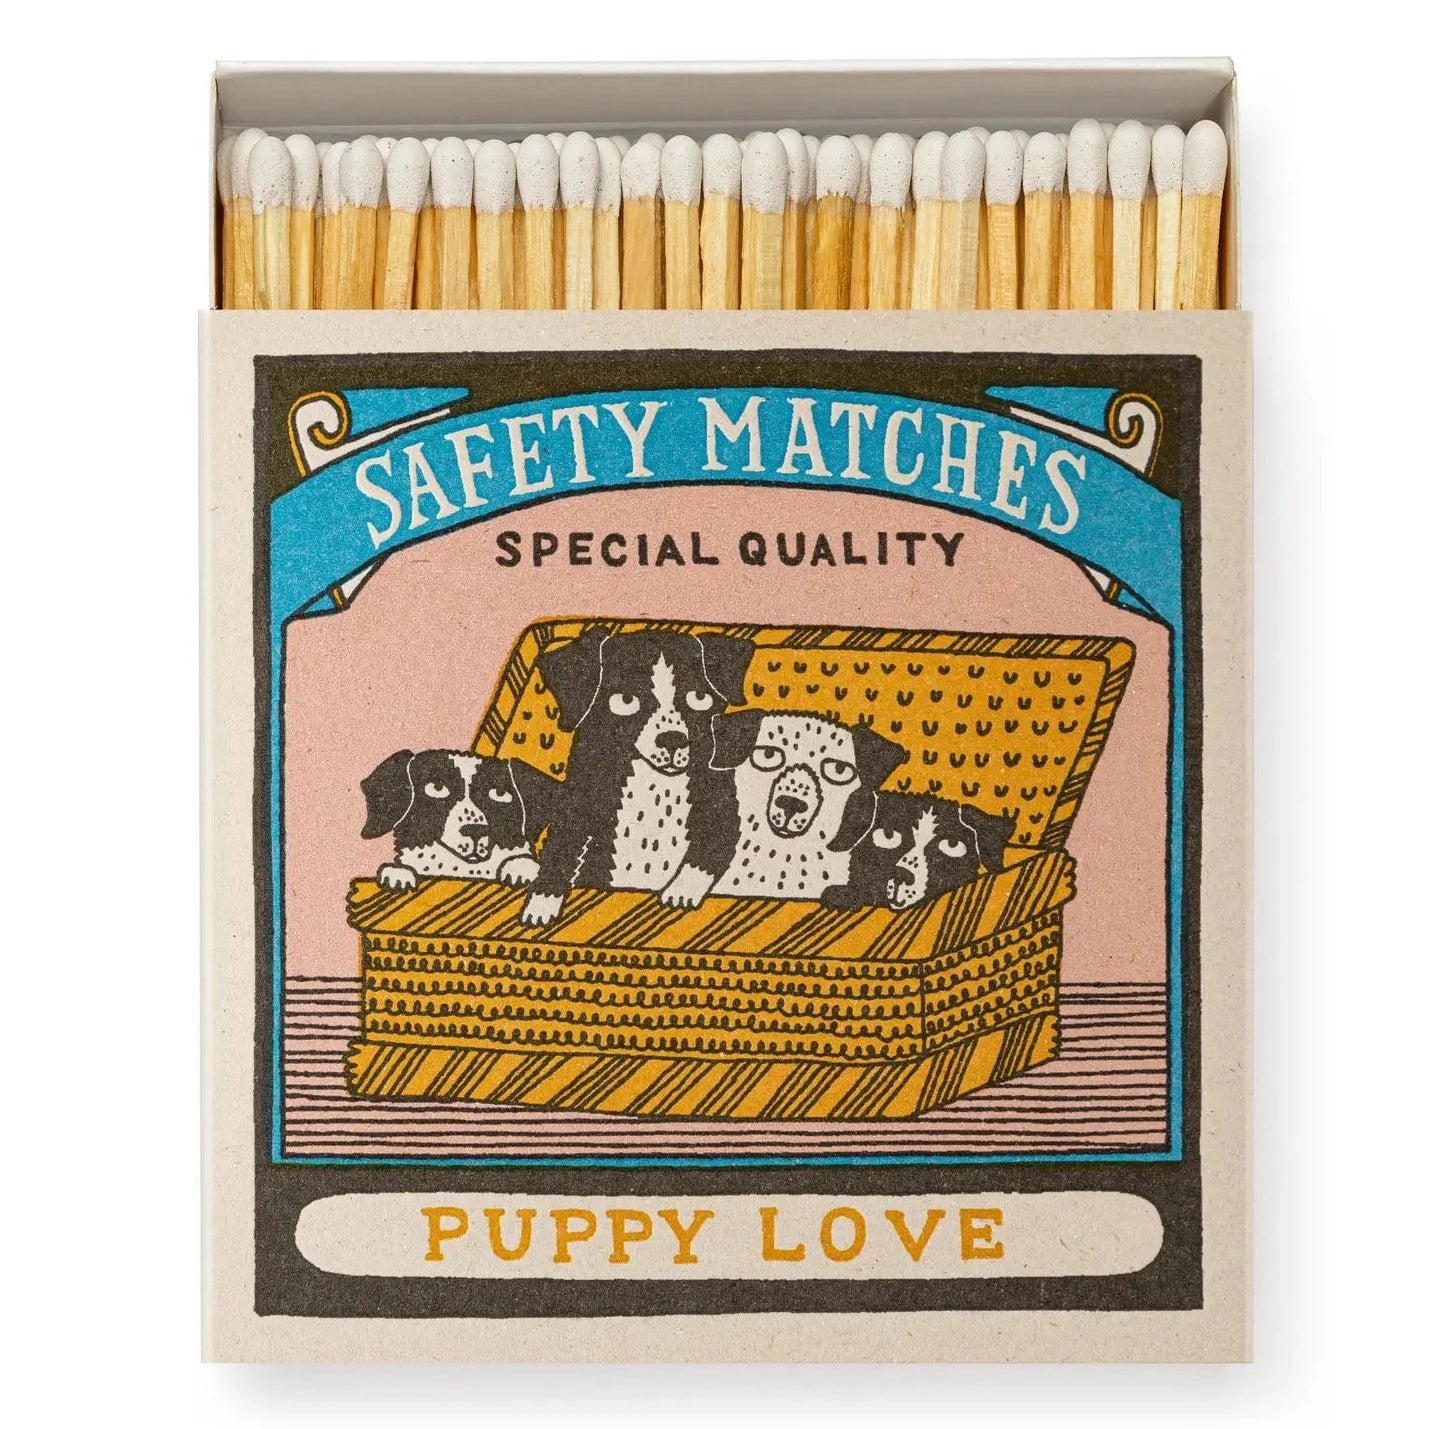 Archivist Gallery Puppy Love Matchbox | Prelude and Dawn Los Angeles, CA